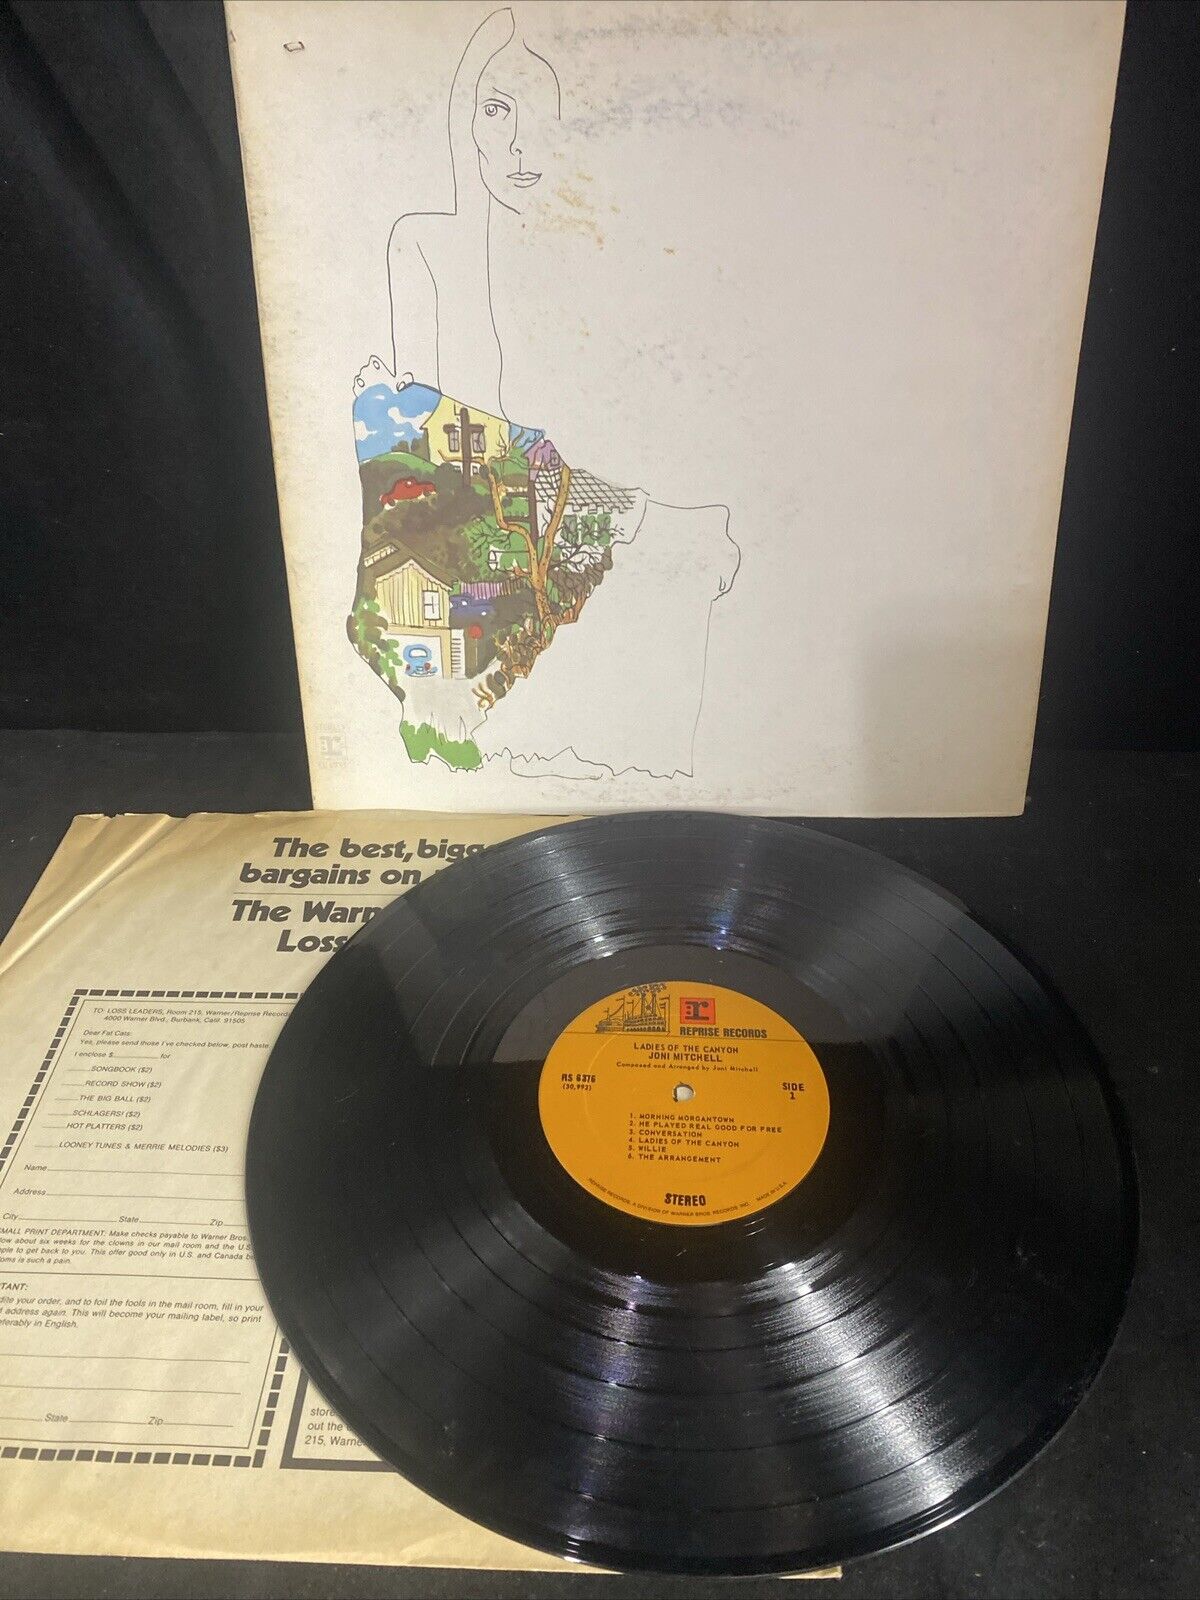 Joni Mitchell Ladies Of The Canyon Vinyl LP 1970 Reprise USED VG/ VG+Condition